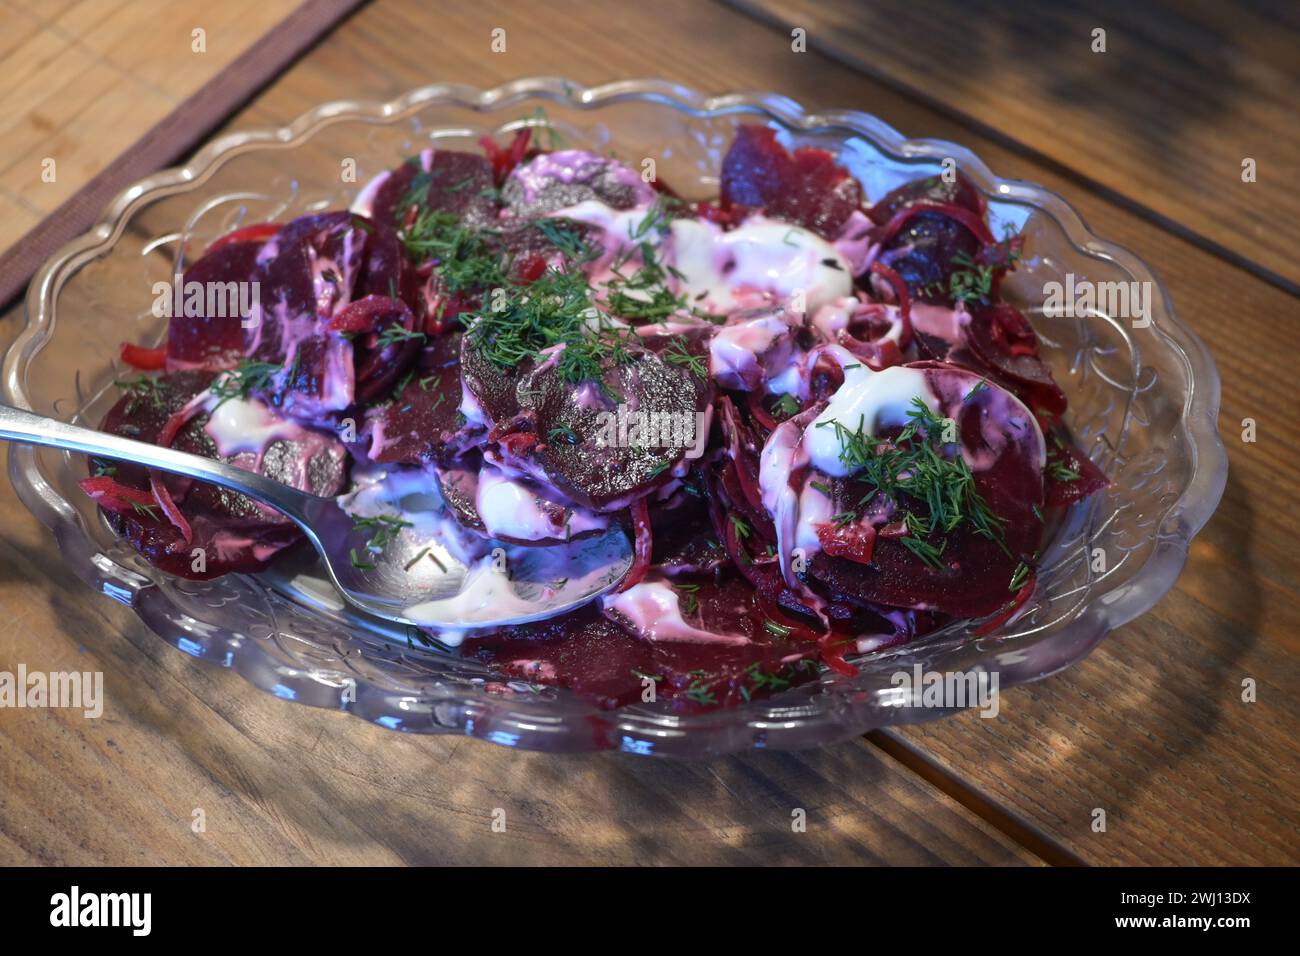 Red beet salad with a creamy dressing and dill garnish, healthy vegetarian dish in a glass bowl, selected focus Stock Photo